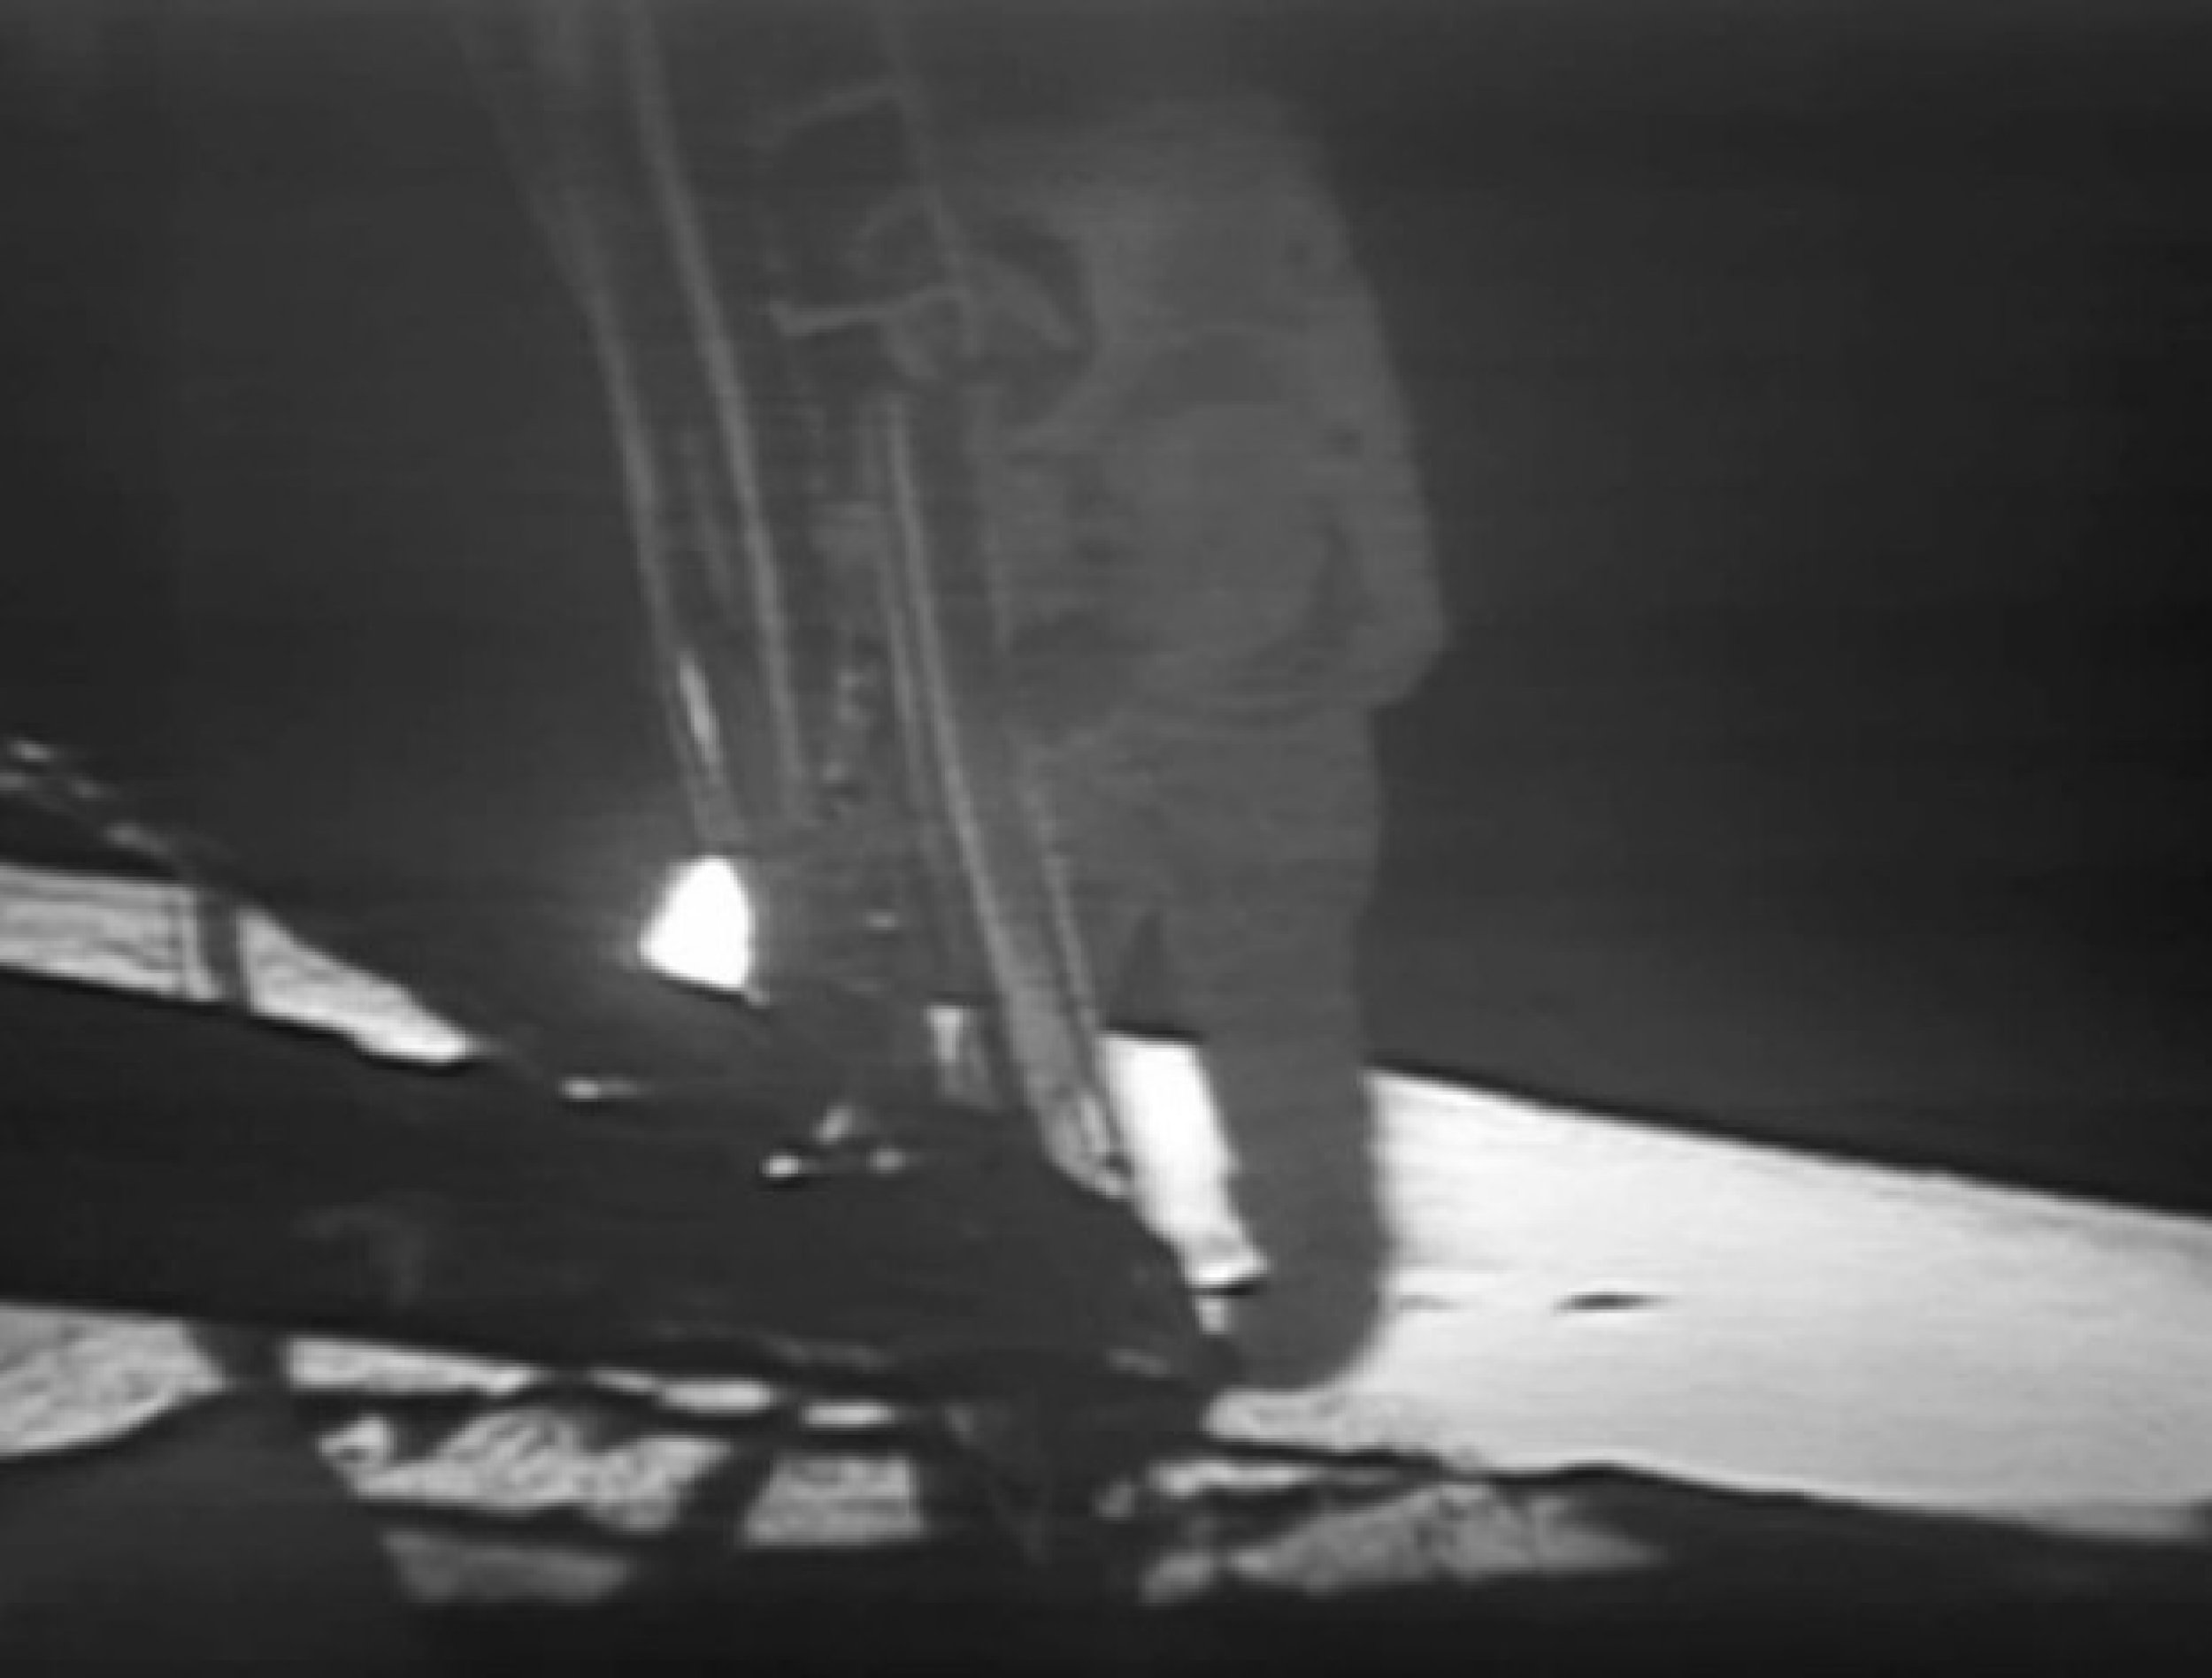 Armstrong on moon